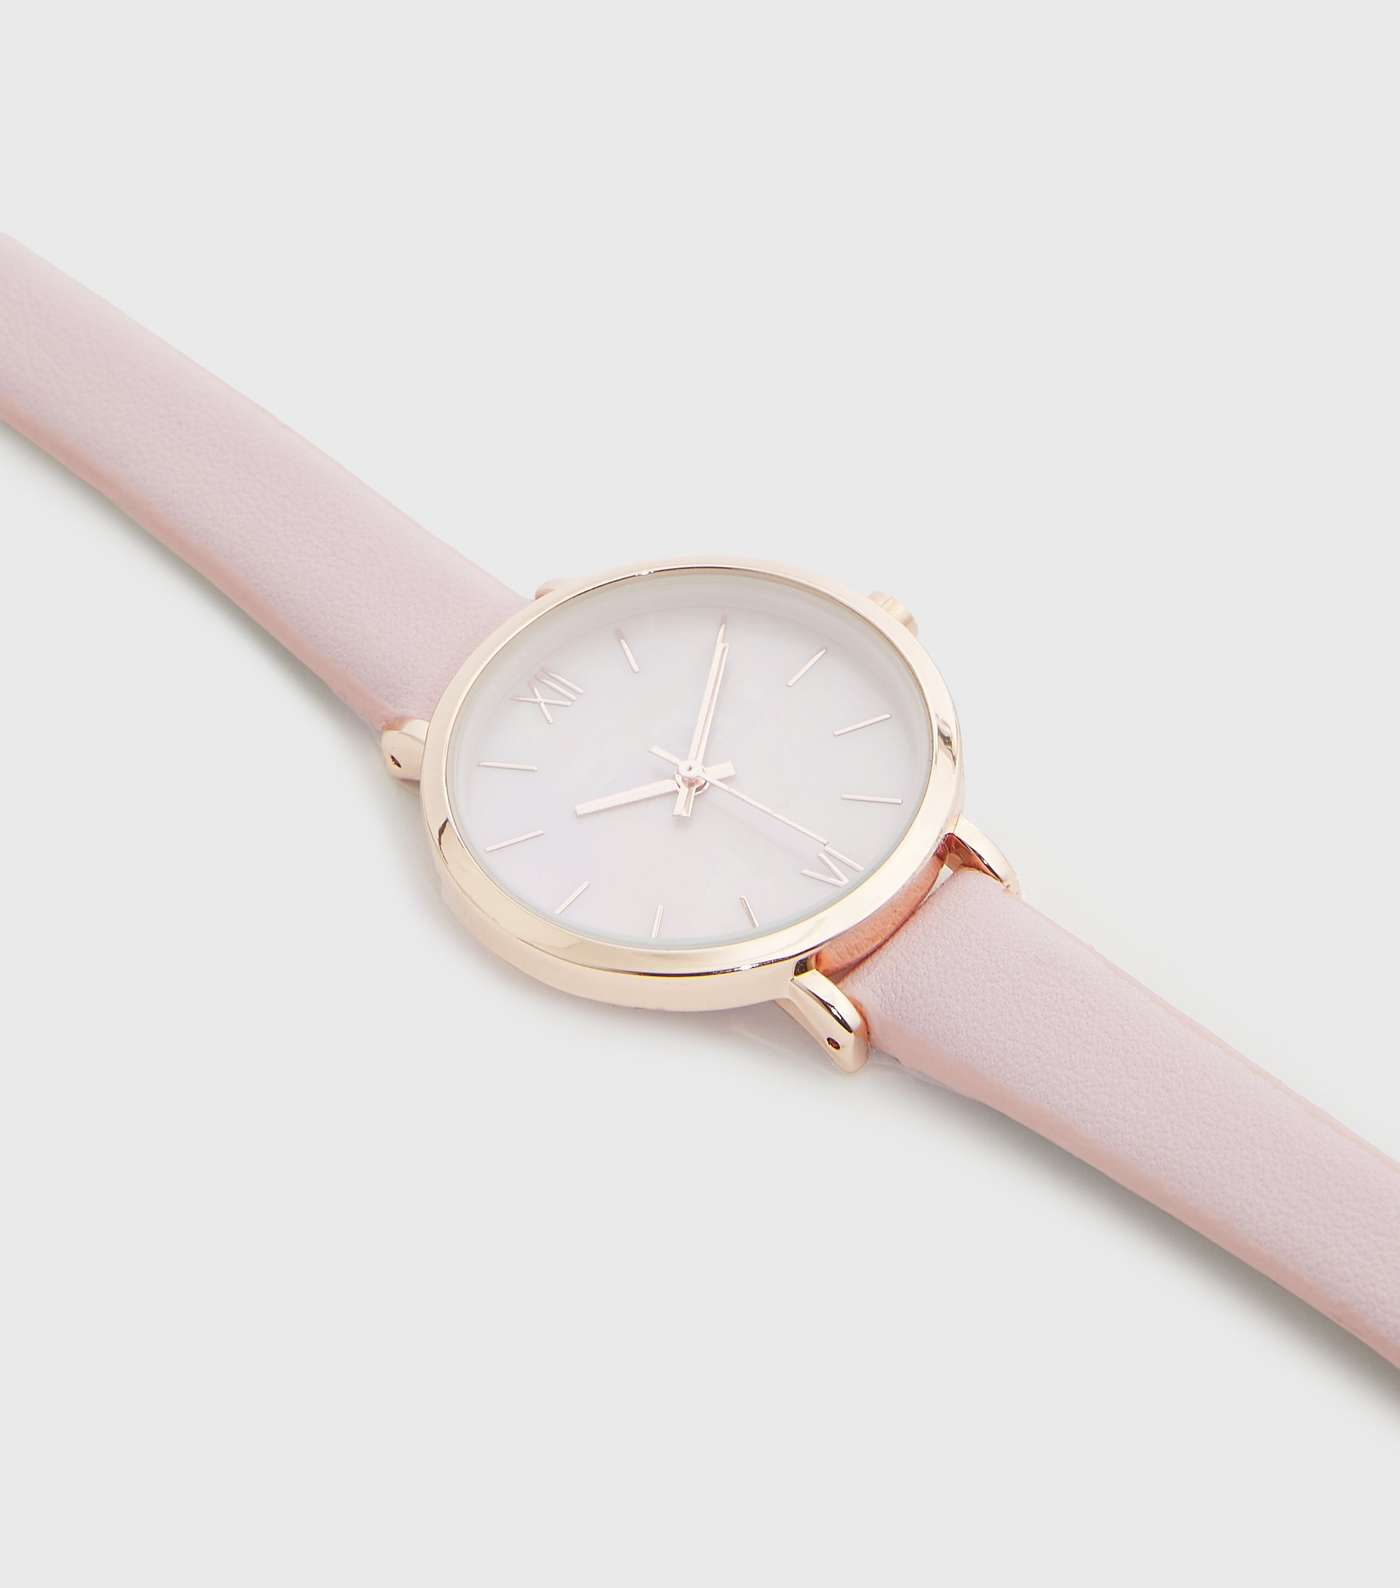 Pink Leather-Look Skinny Strap Watch Image 2